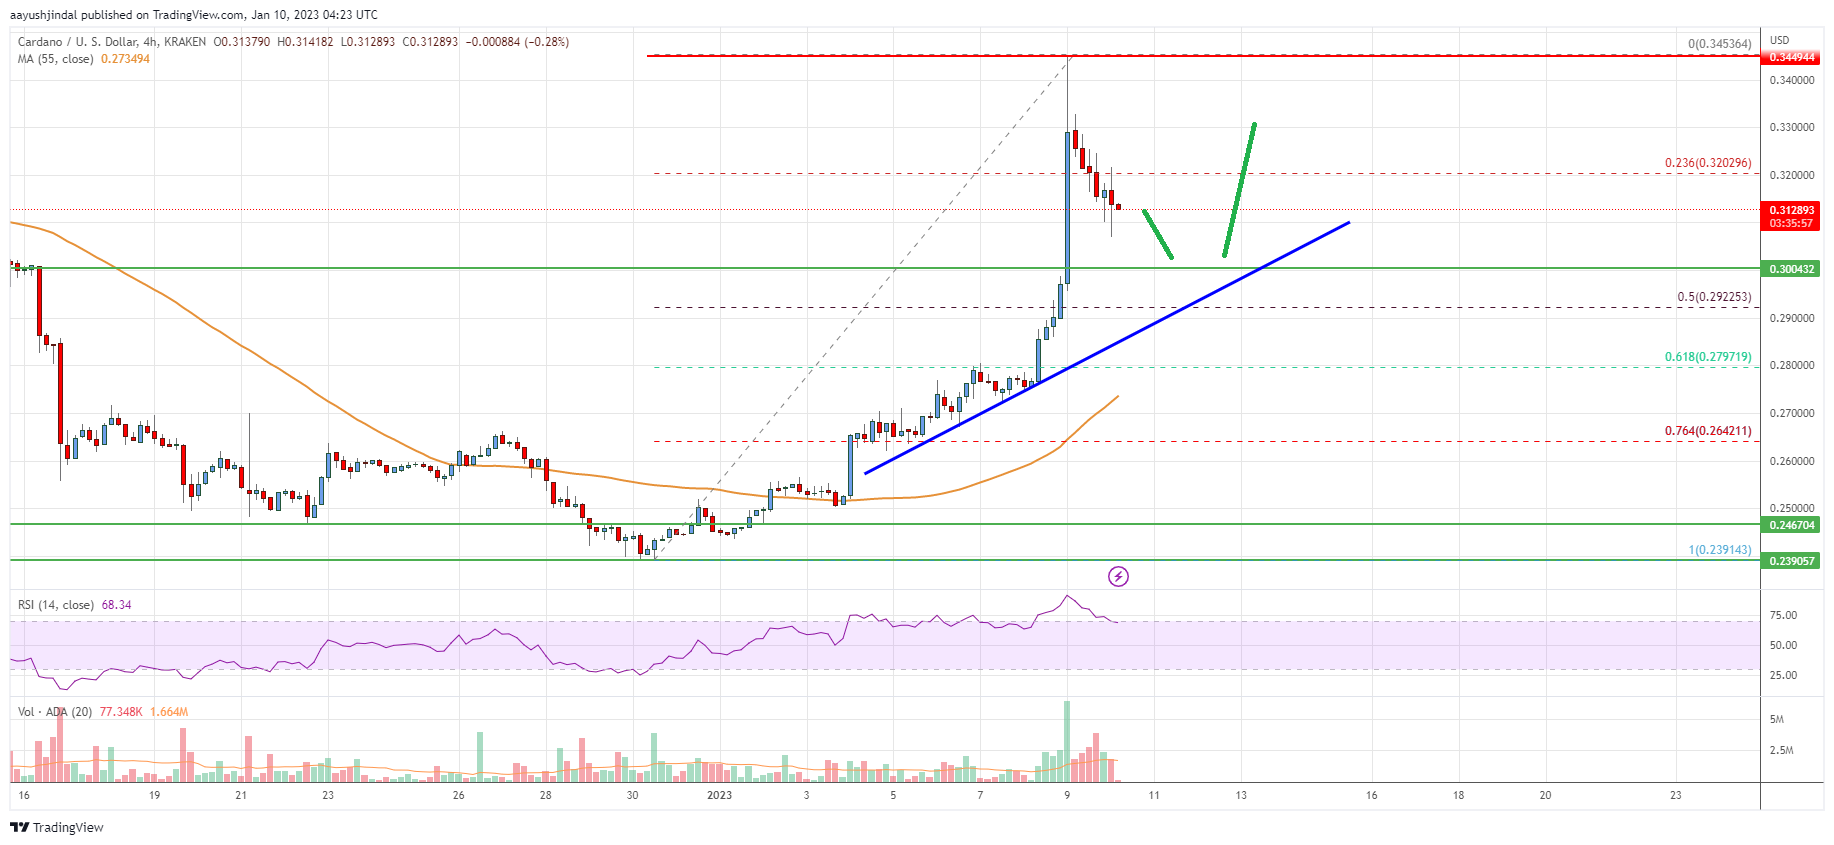 Cardano (ADA) Price Analysis: Bulls Are Back, Push to $0.40 Possible